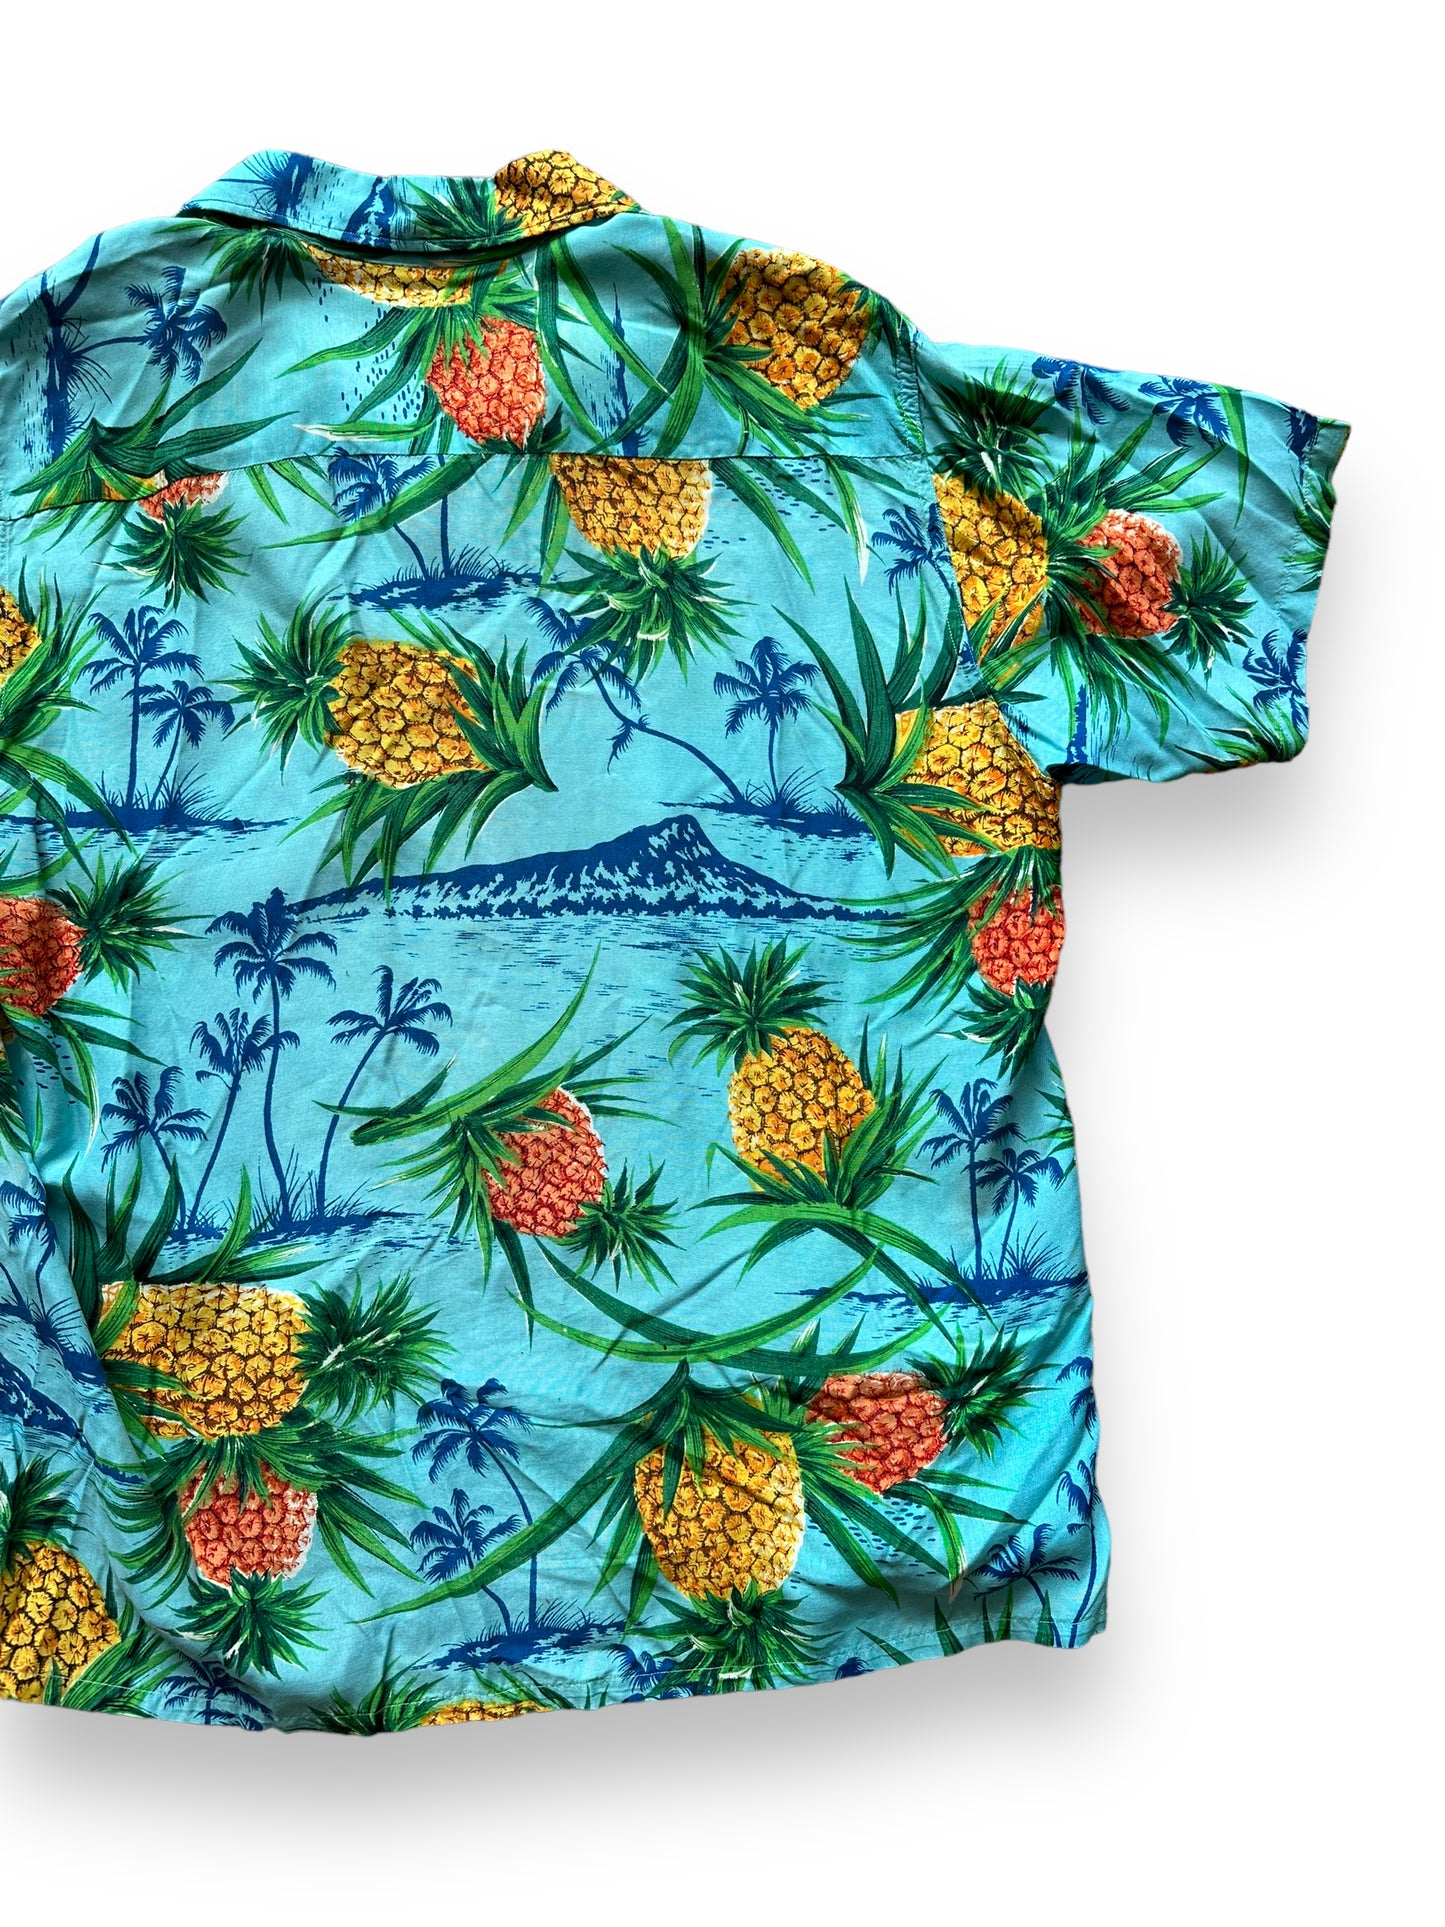 Right Rear View of Vintage South Pacific Blue Pineapple Aloha Shirt SZ M | Seattle Vintage Rayon Hawaiian Shirt | Barn Owl Vintage Clothing Seattle